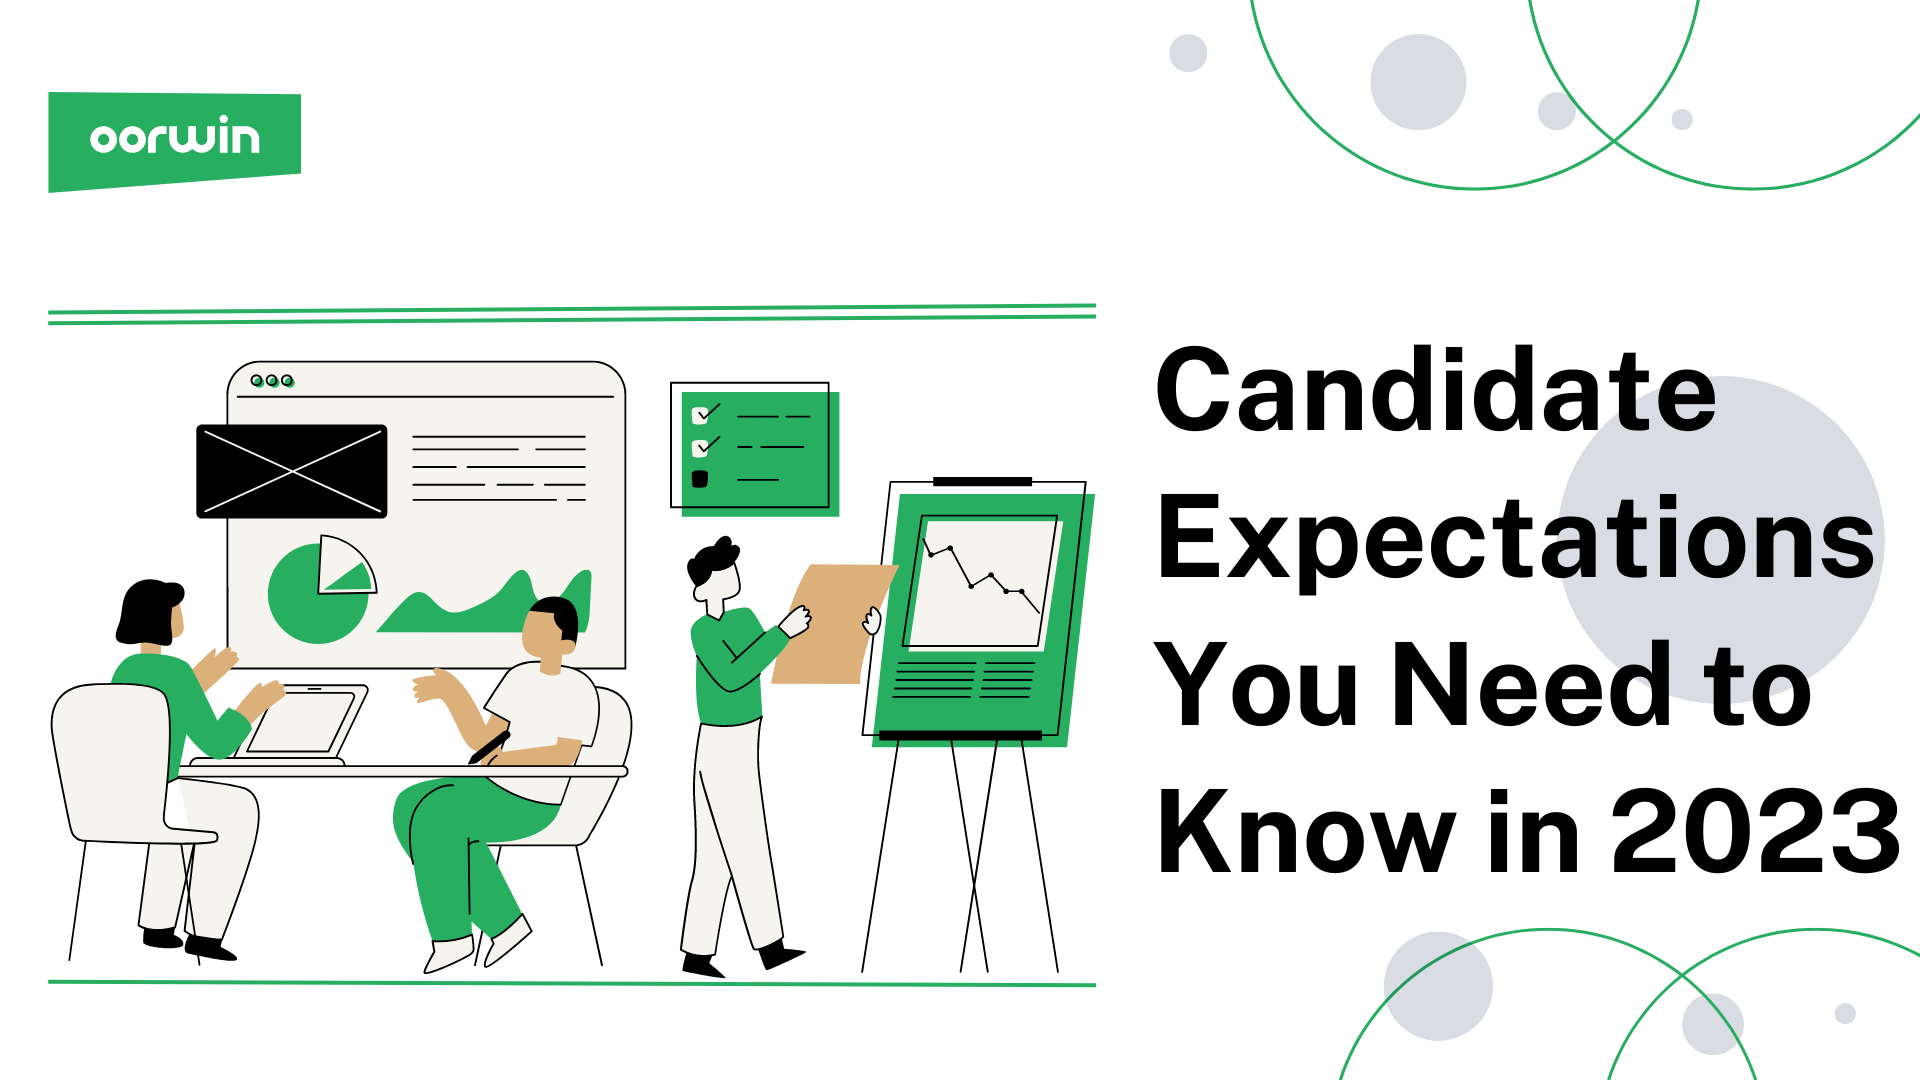 Candidate Expectations You Need to Know in 2023